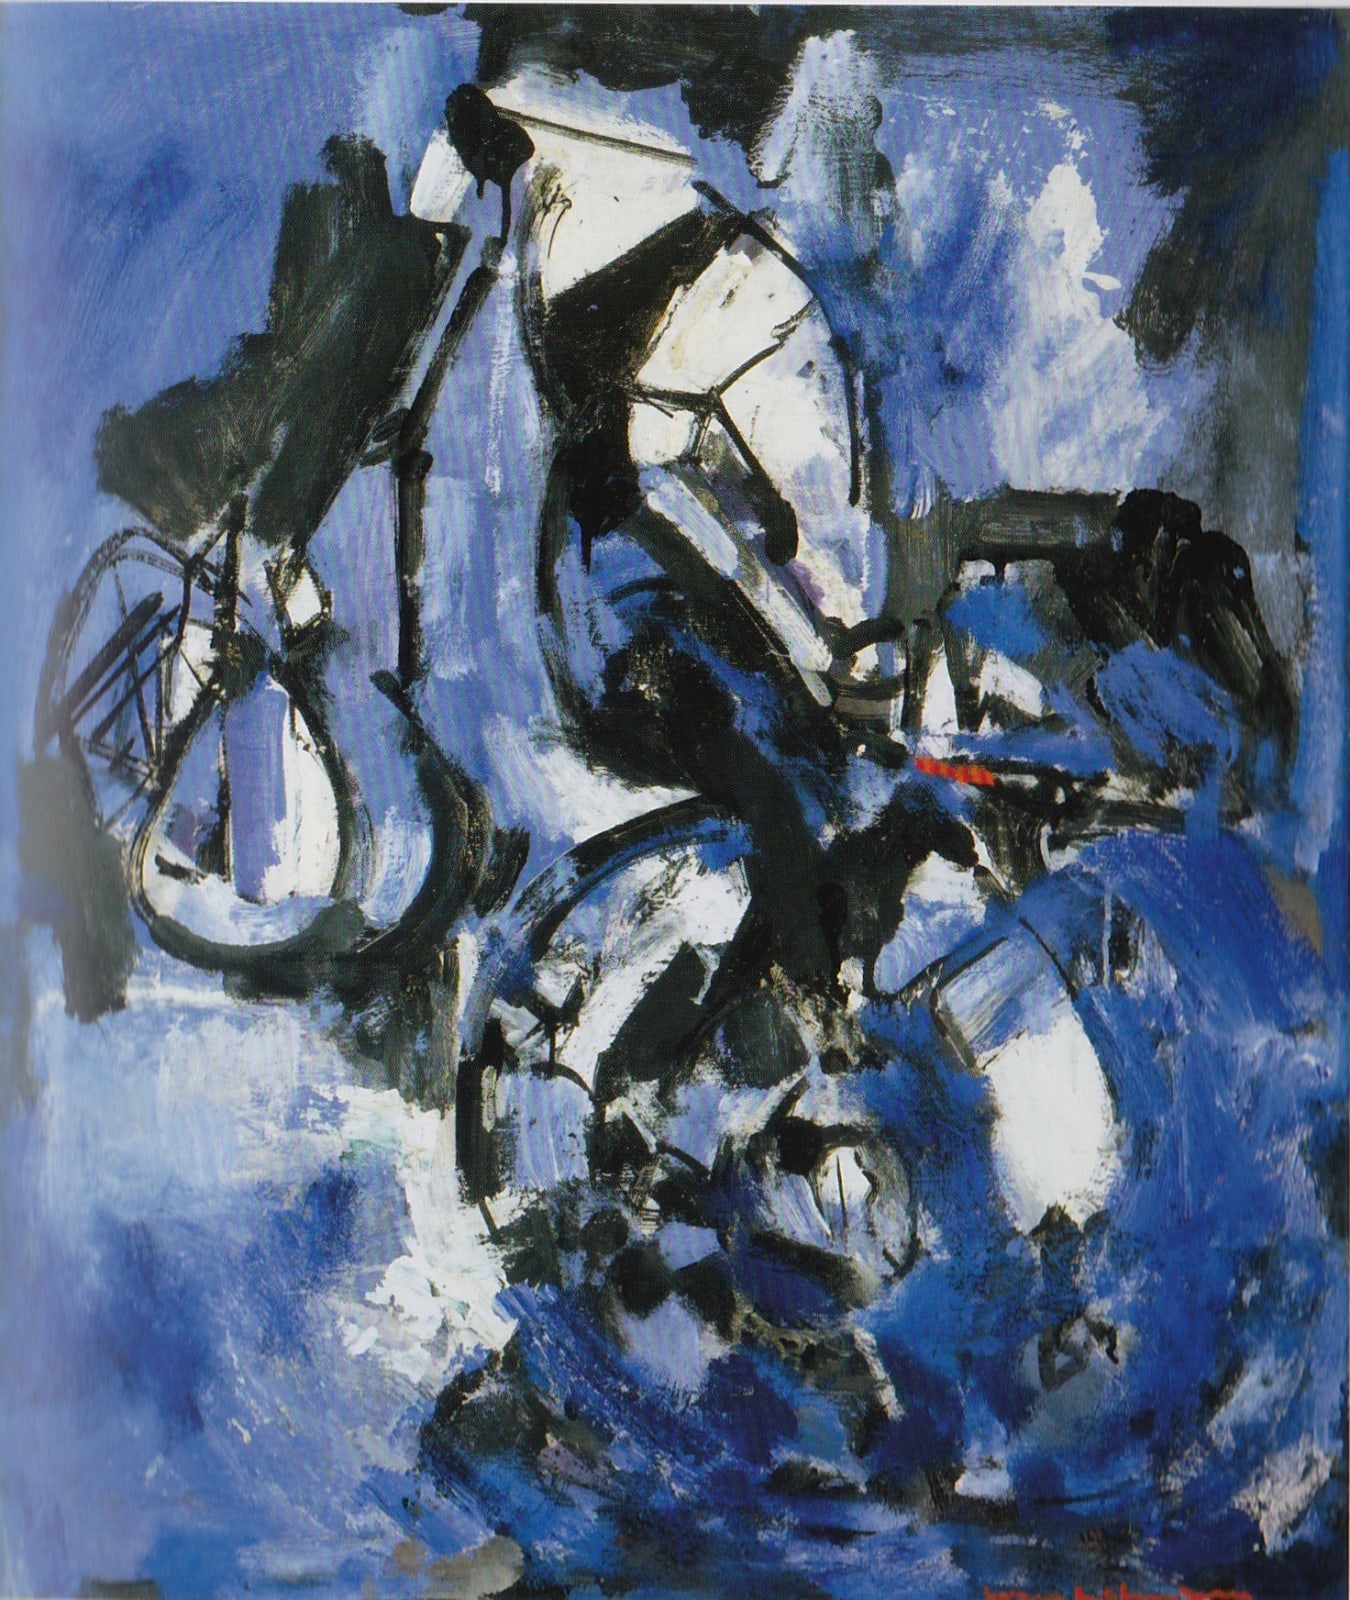 Hans HOFMANN (1880 – 1966) Balance in Black, Blue and White, 1947 Oil on Panel 35 x 30 inches / 88.9 x 76.2 cm Signed lower right Hans Hofmann Painting on verso HH Cat No 519-1947